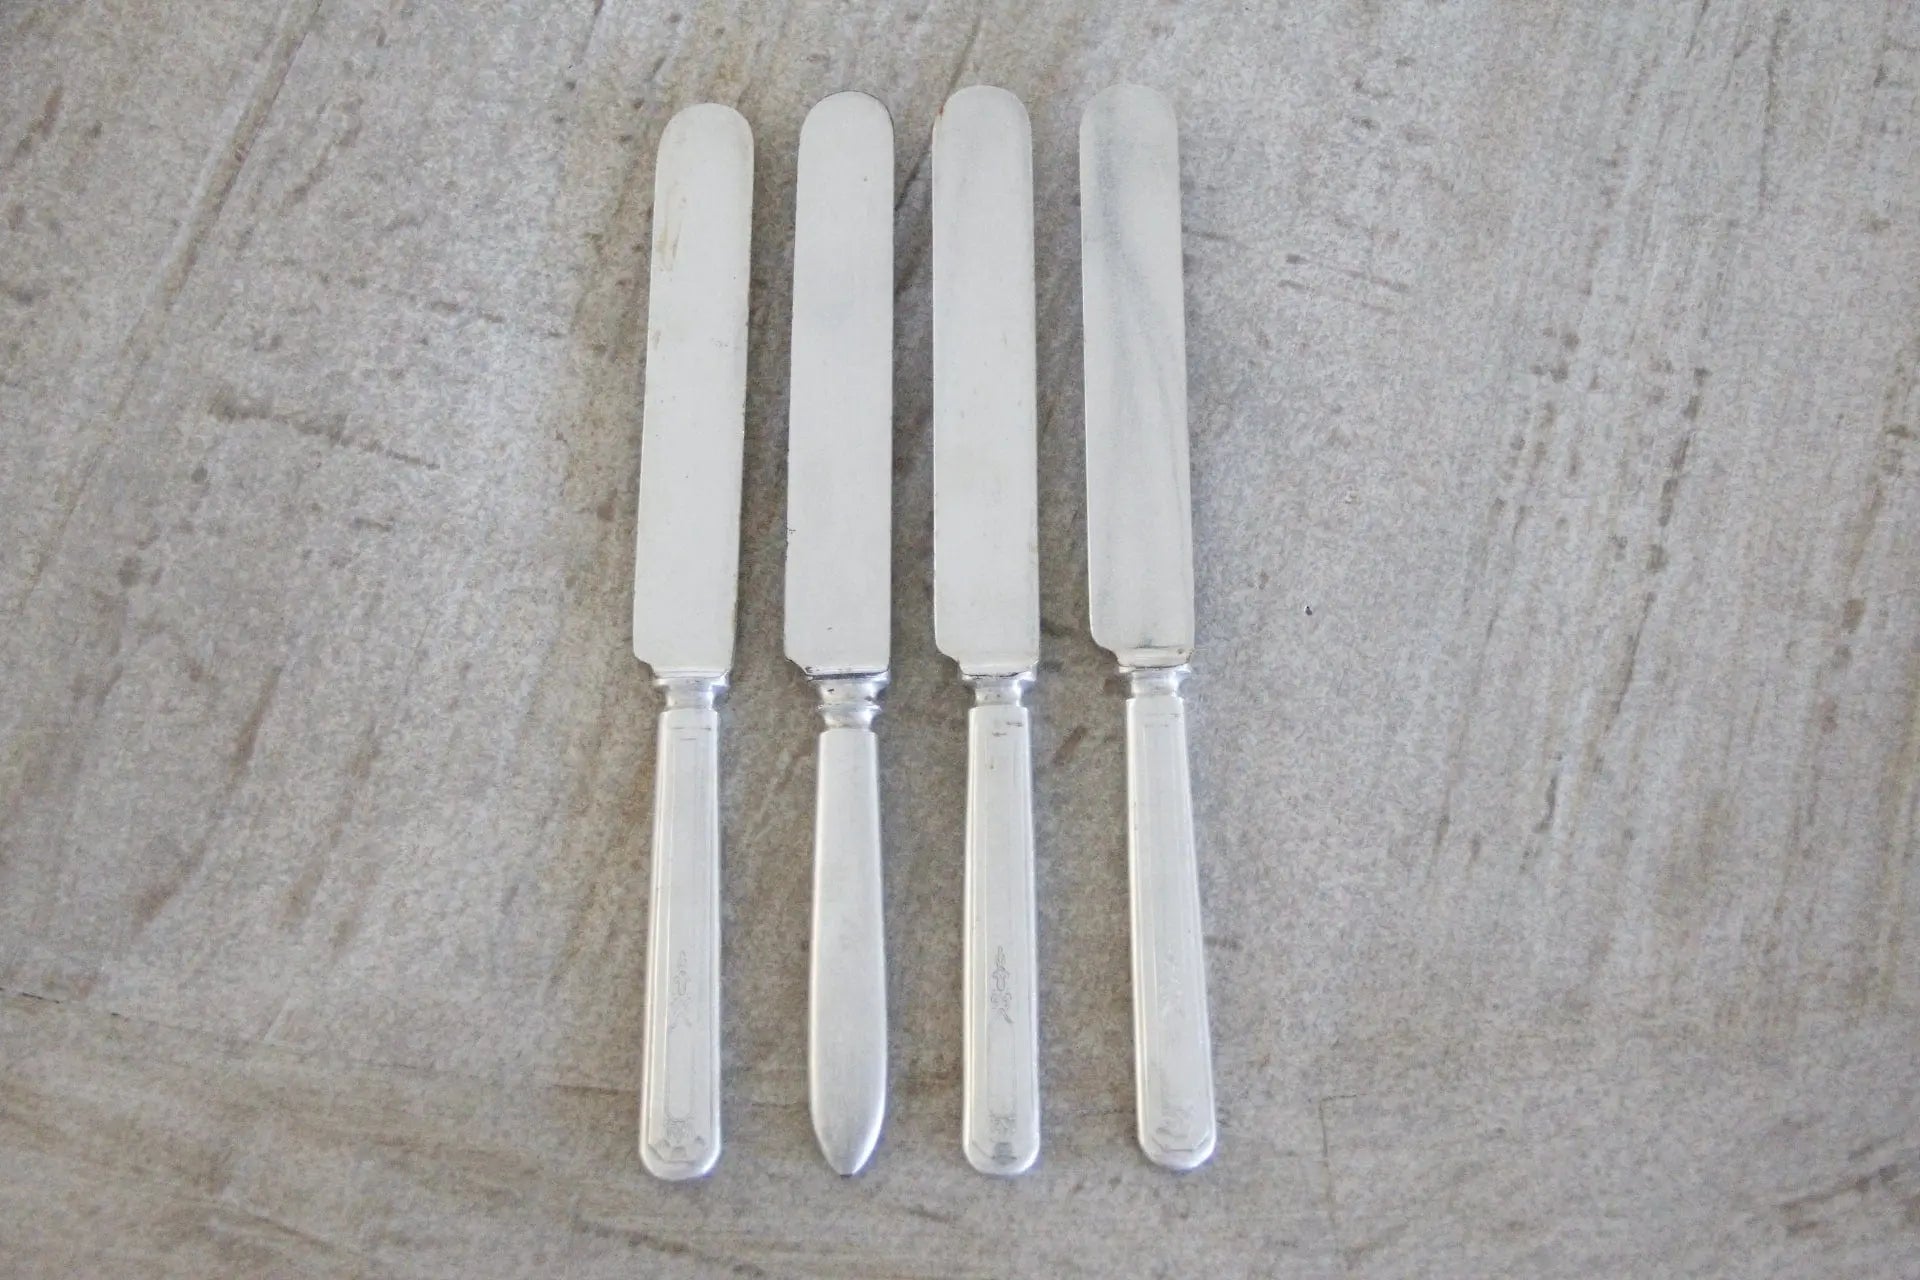 Antique Silver Plated Blunt Table Knife | Flatware 4 Mixed Pcs  Debra Hall Lifestyle